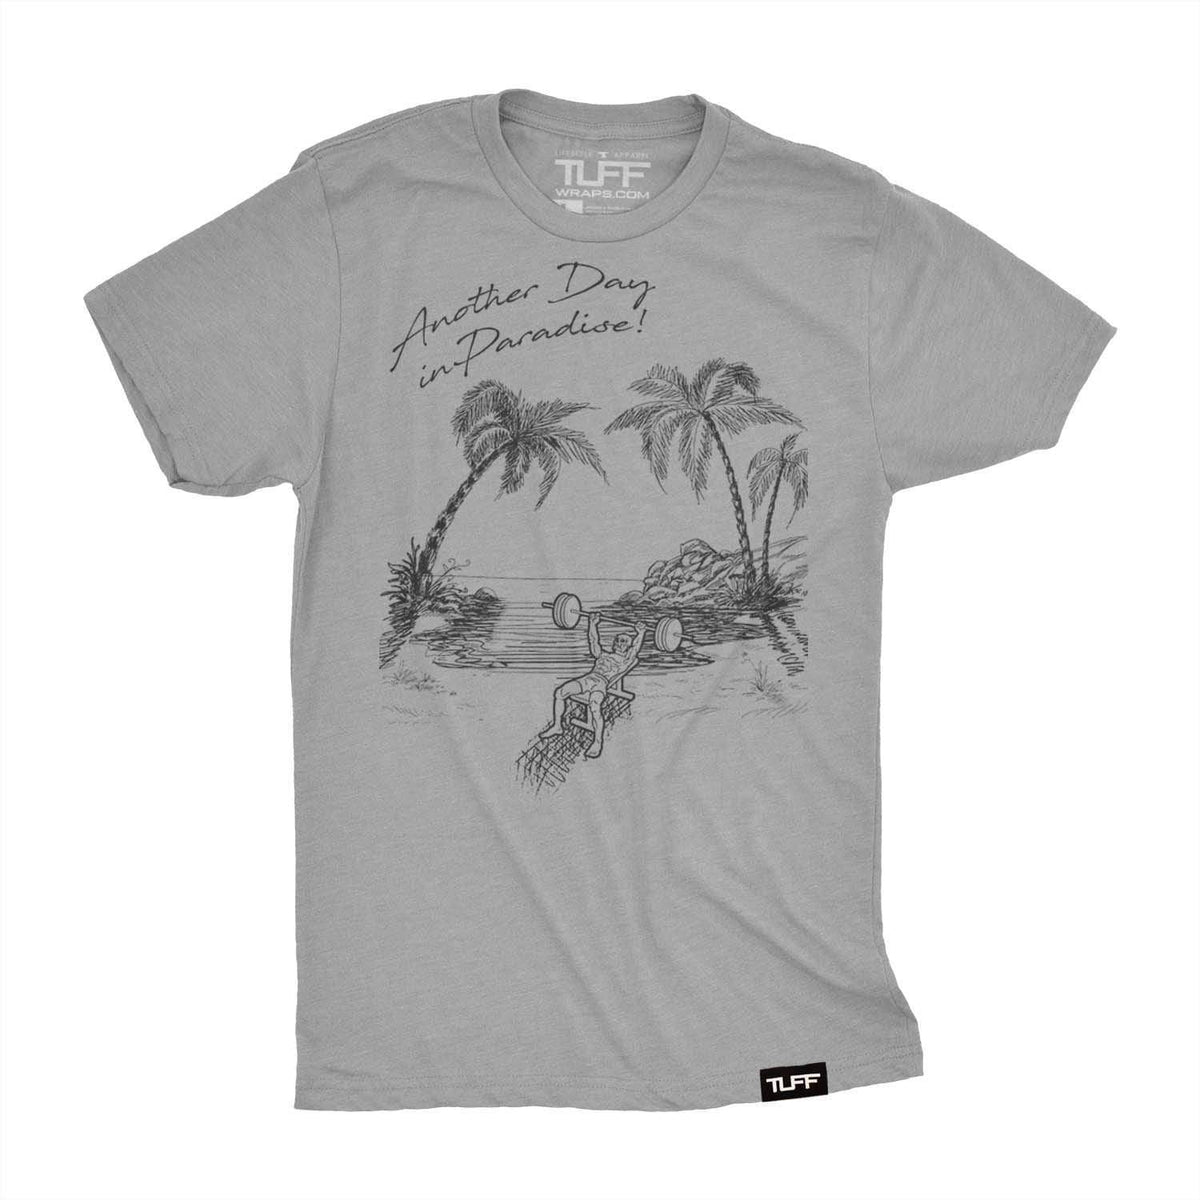 Another Day in Paradise Tee S / Heather Gray TuffWraps.com